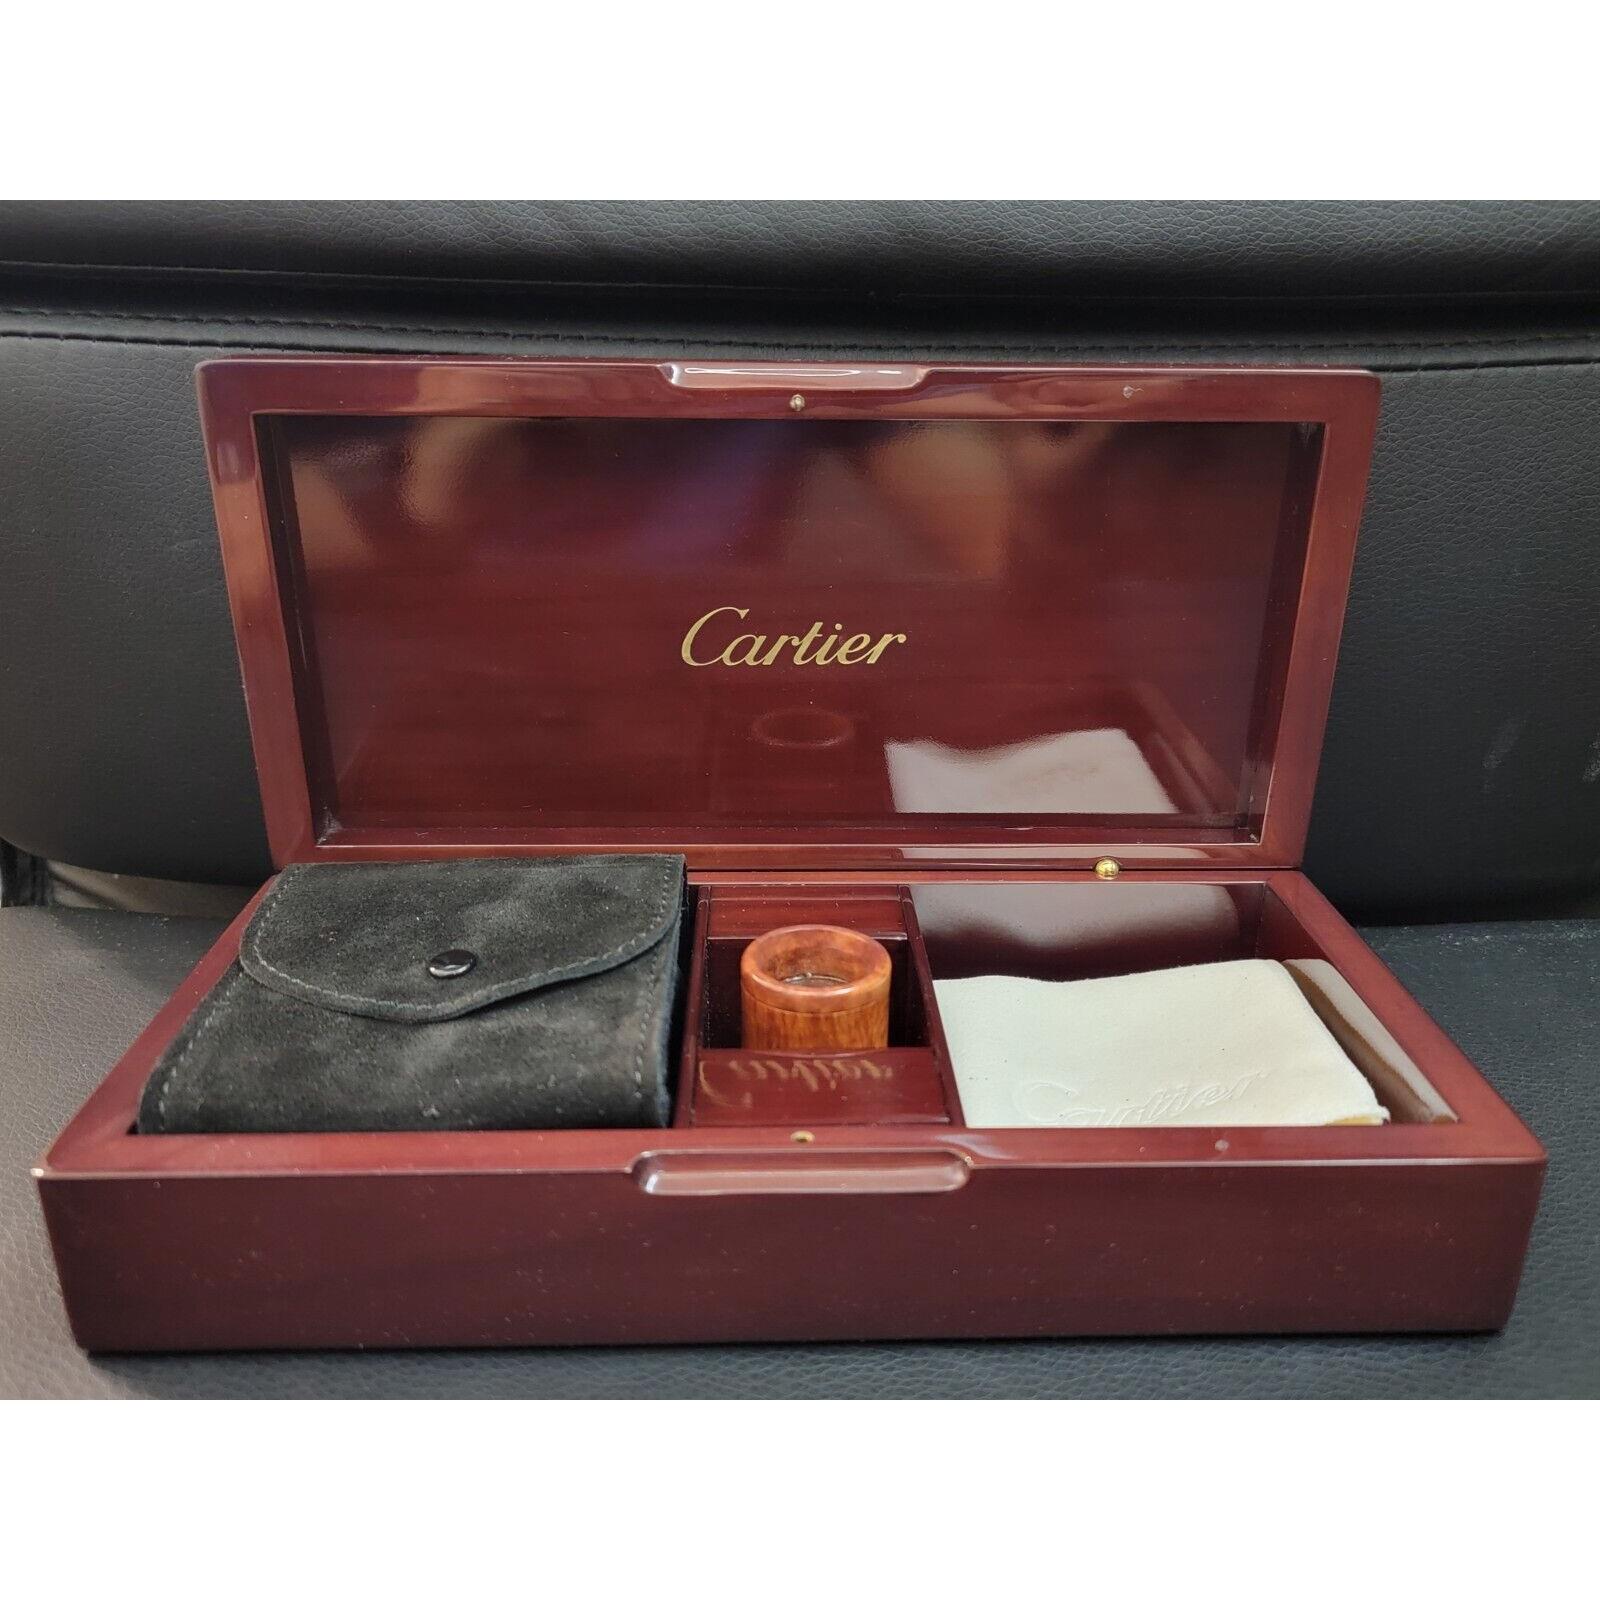 Cartier Watch Mahogany Wooden Box Leather Pouch Loupe Cloth Gift